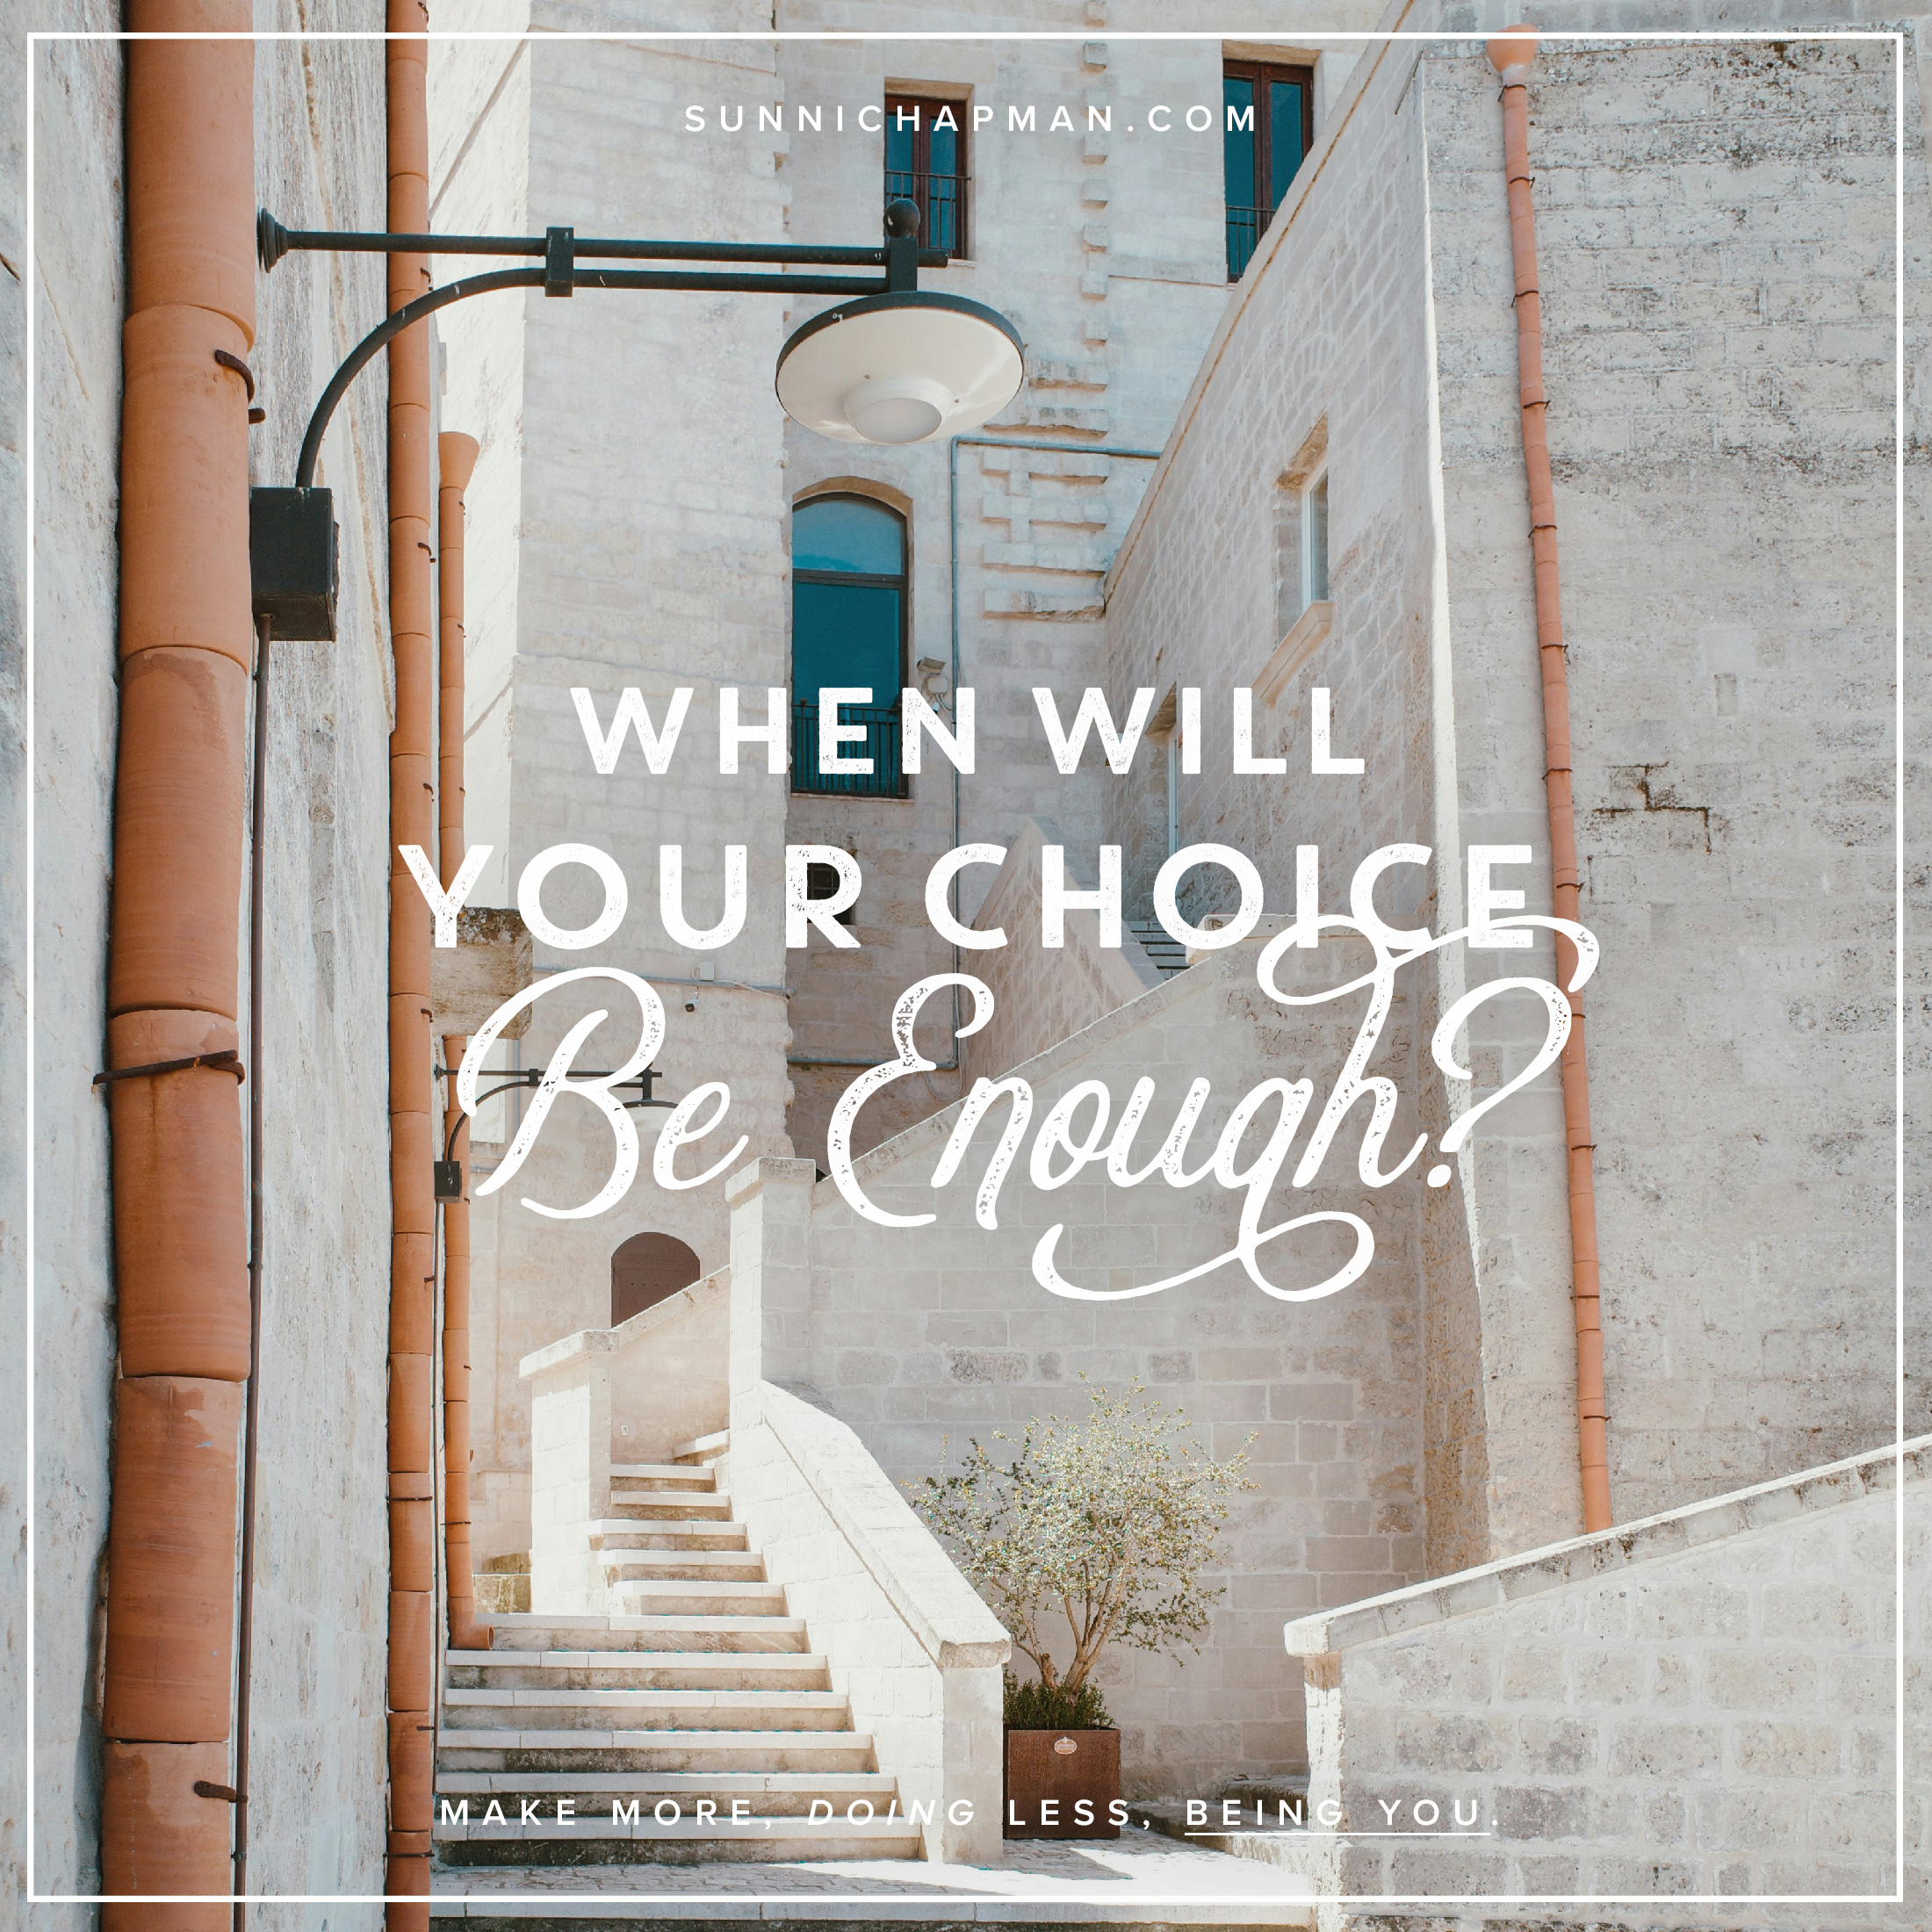 A motivational image featuring a textured stone staircase with a street lamp attached to the building. A clear blue sky and partial view of another building are visible in the background. Overlaid text in elegant white script reads 'When will your choice be enough?' with the website 'sunnichapman.com' and the tagline 'Make more doing less, being you' at the bottom.